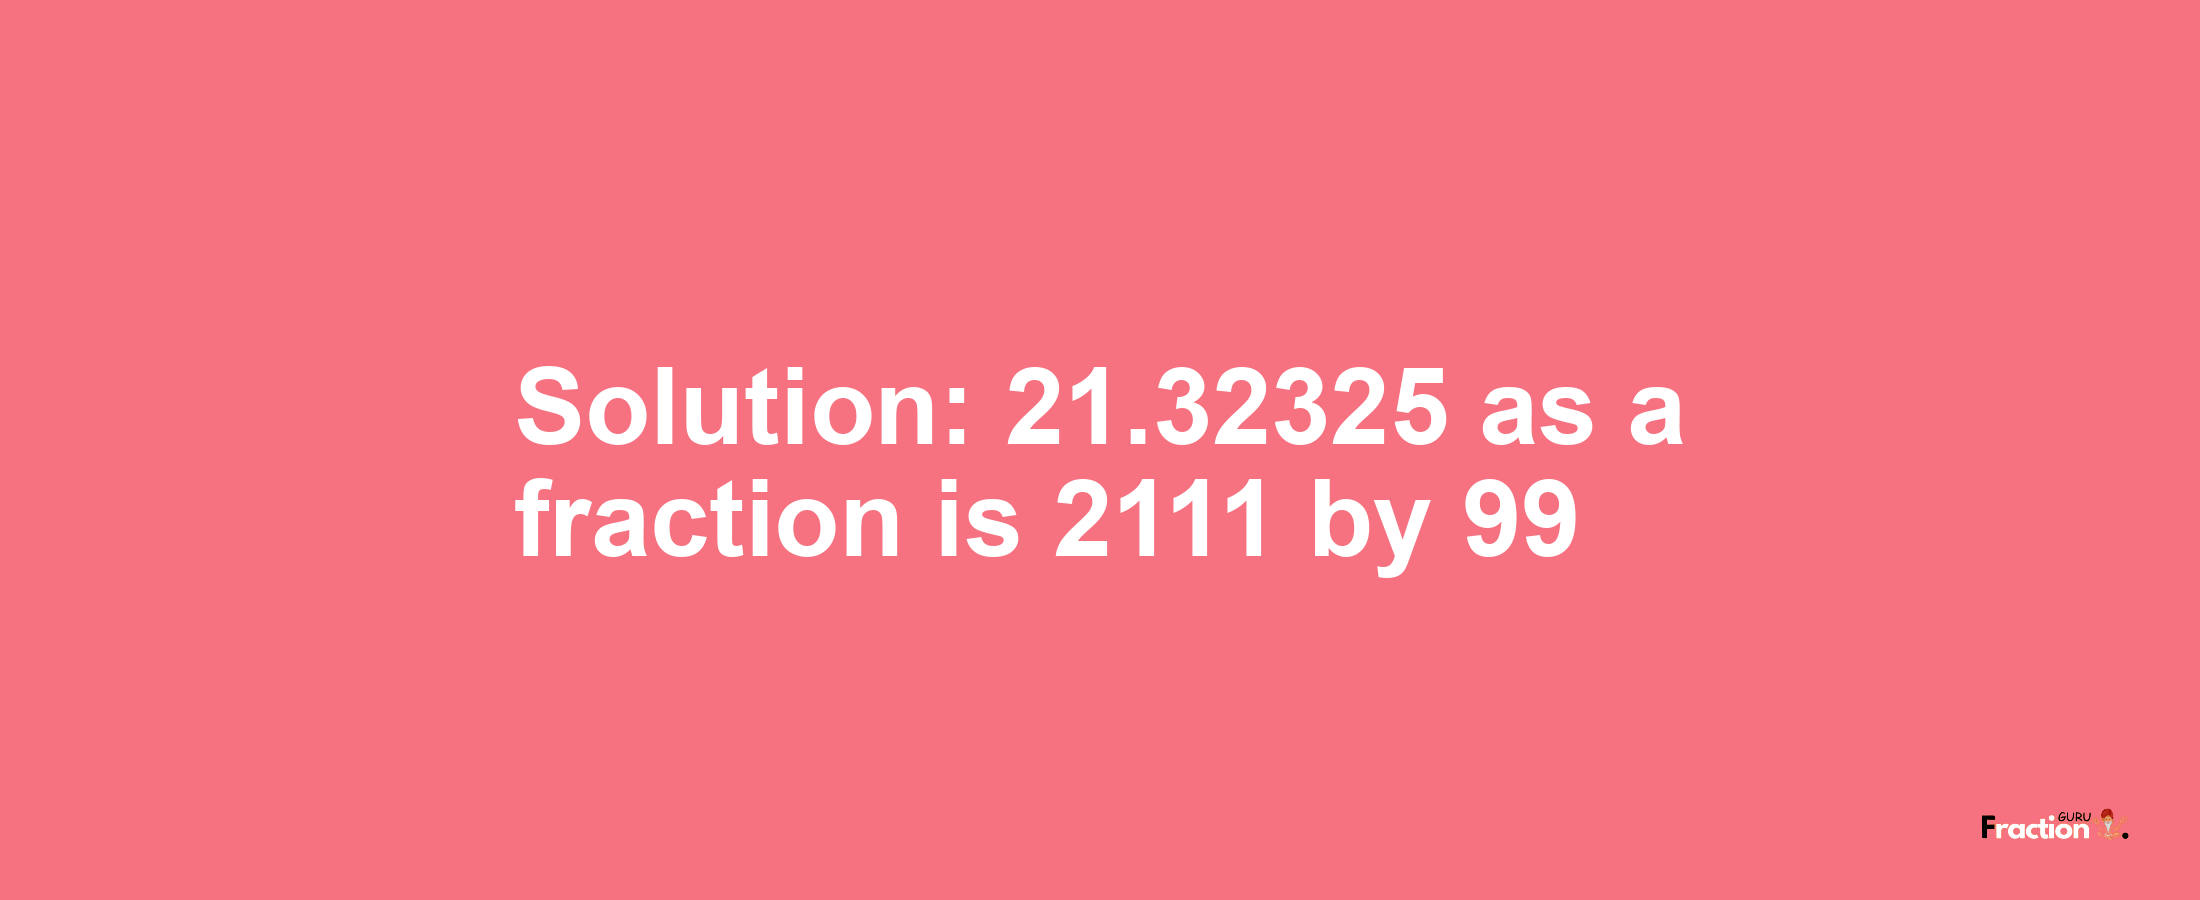 Solution:21.32325 as a fraction is 2111/99